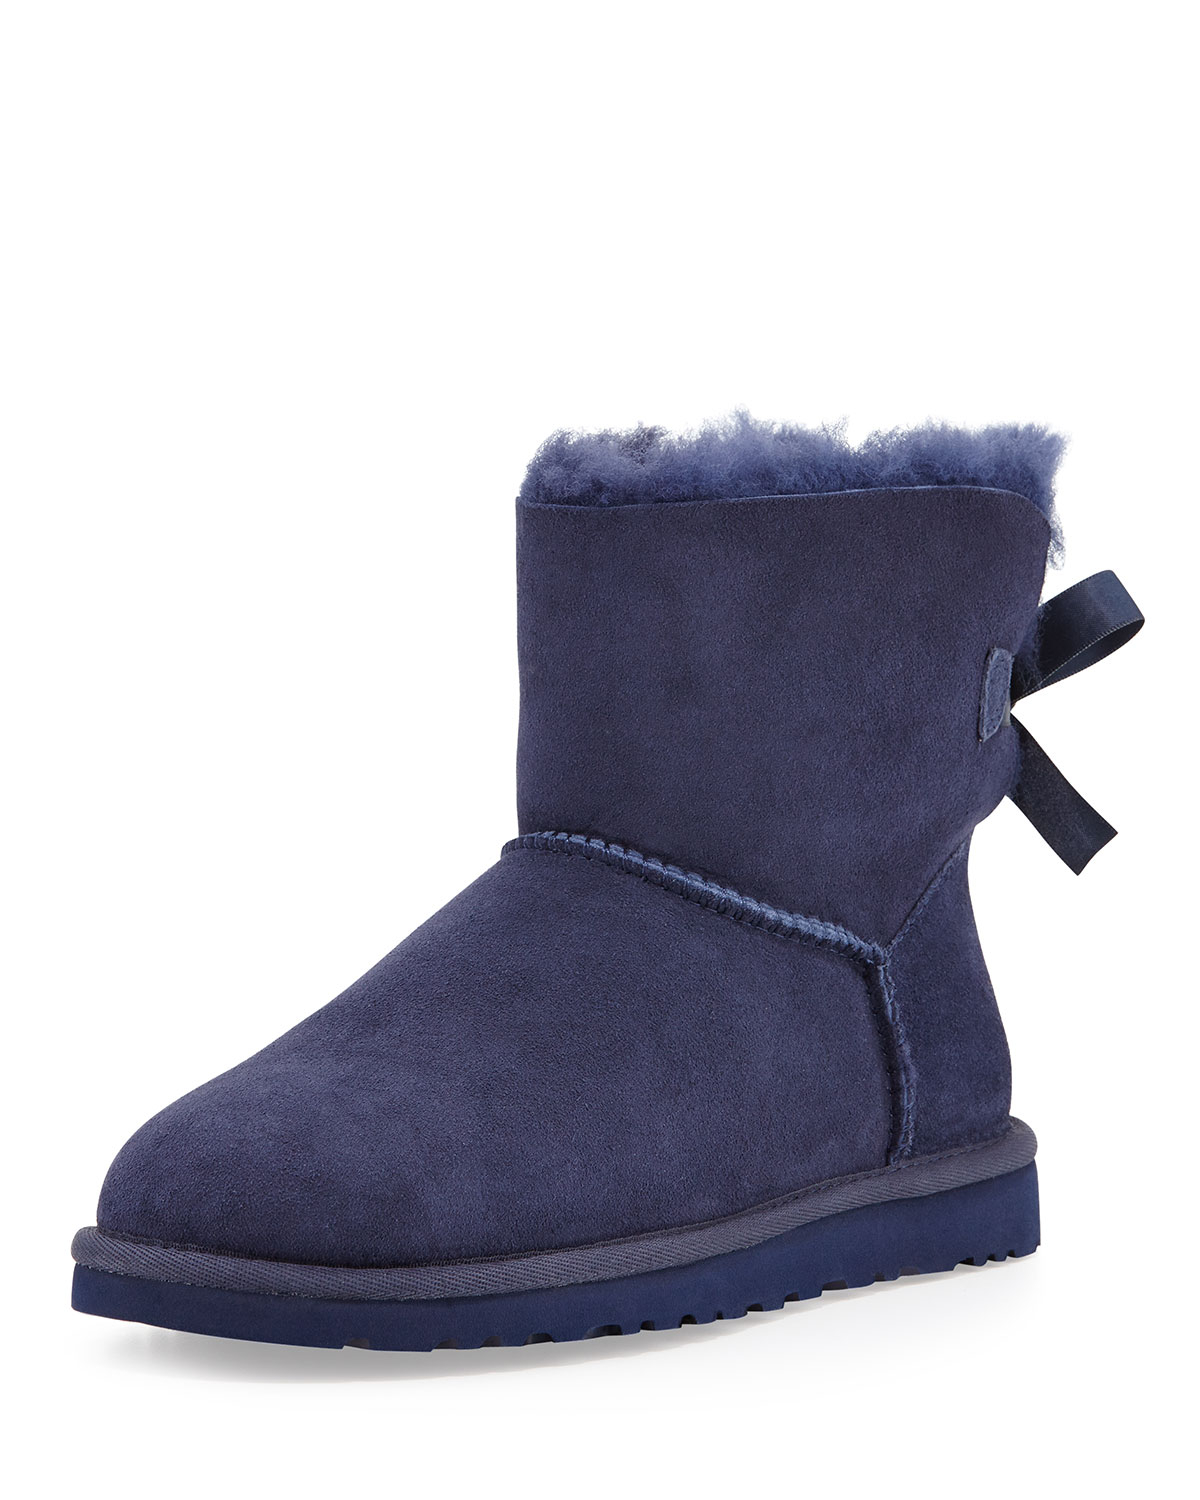 blue uggs for boys